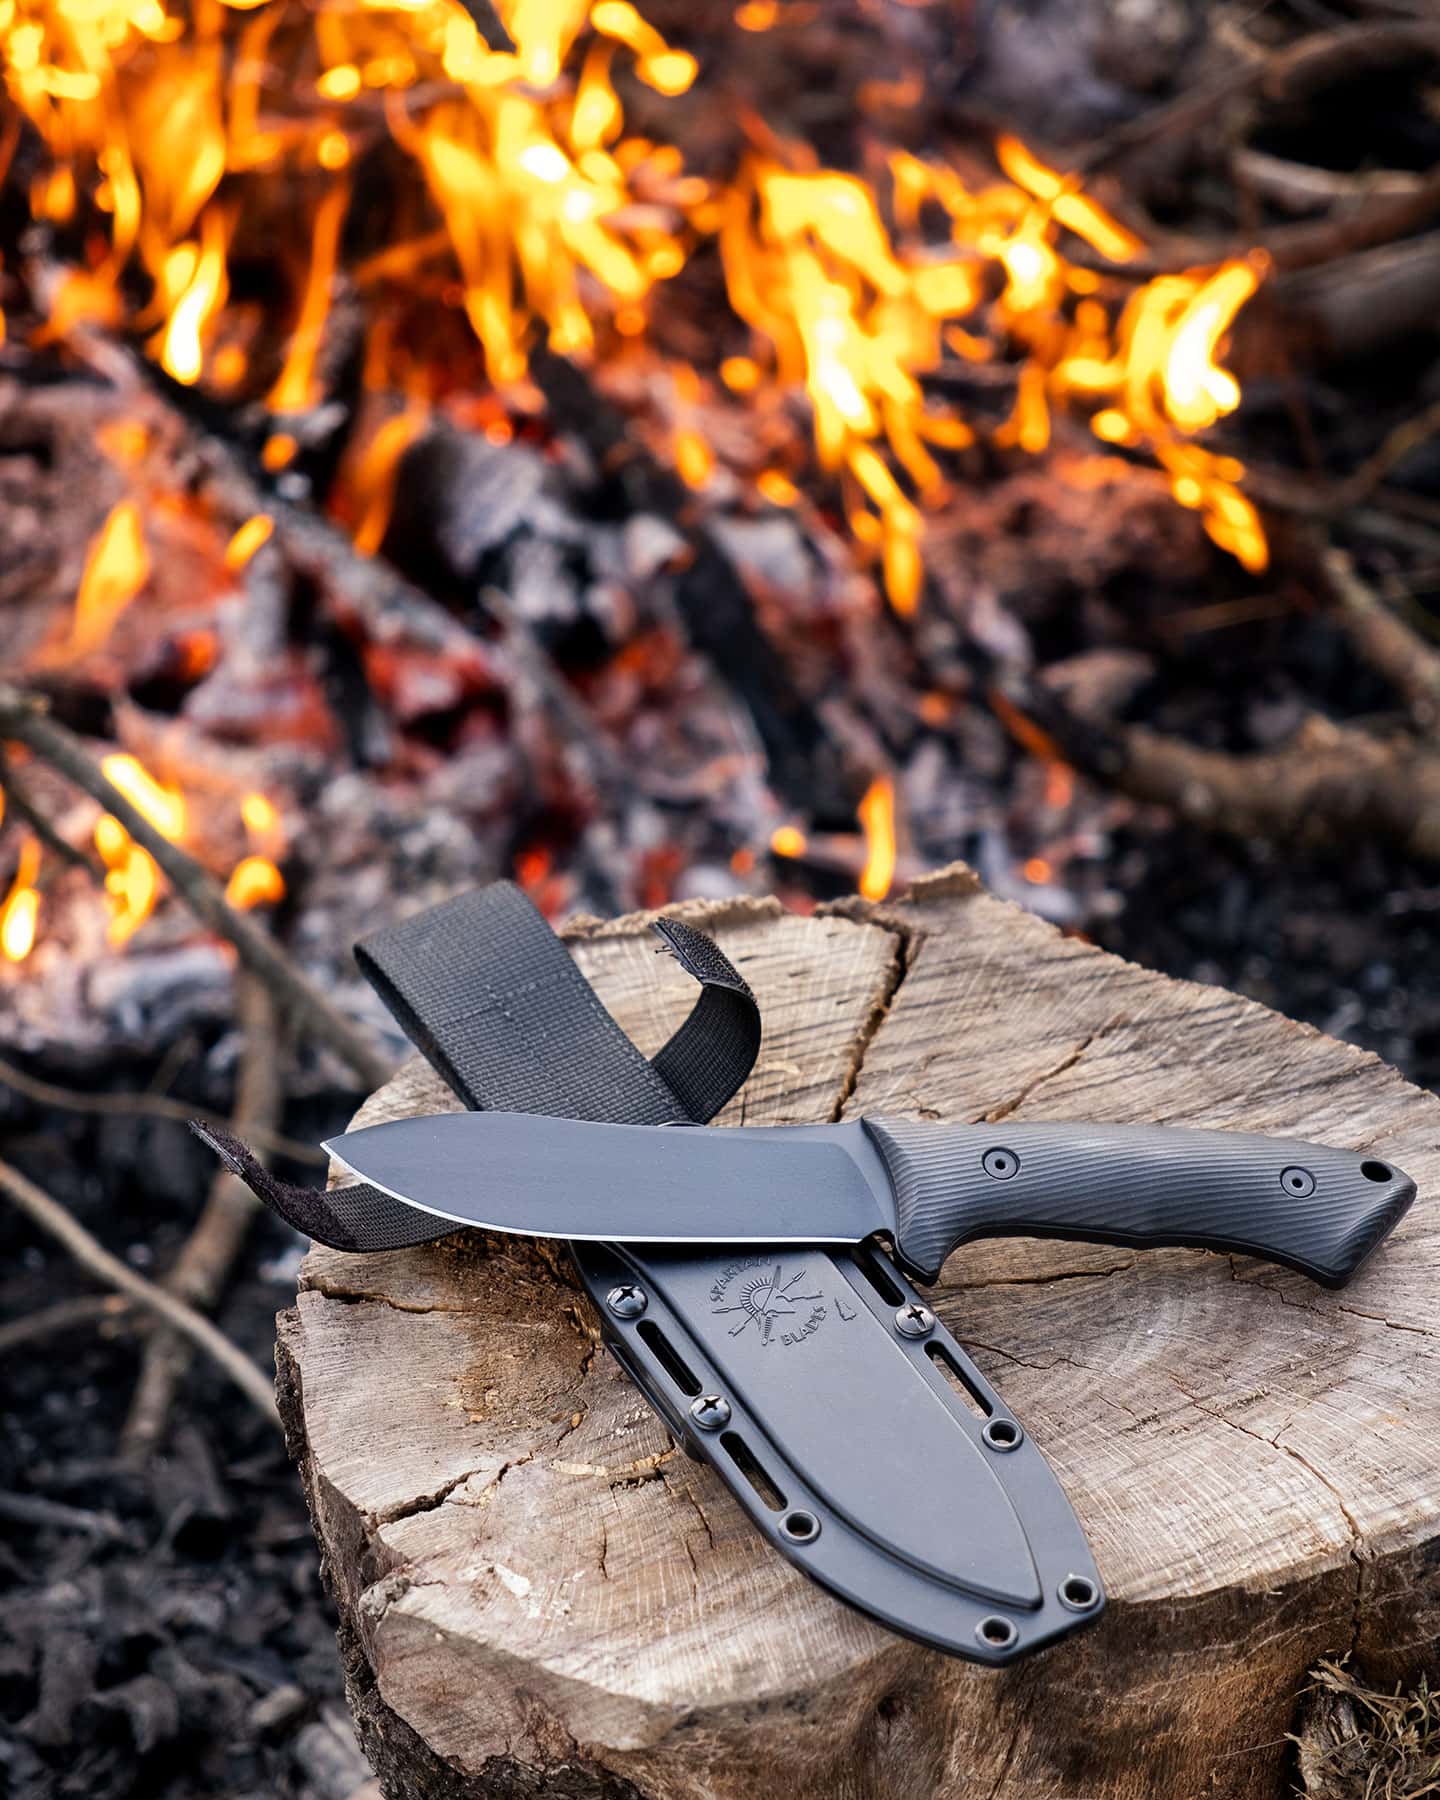 The Saprtan Halsey Nessmuk wins won the award for Best Tactical Blade that’s Good for Other Stuff Too.